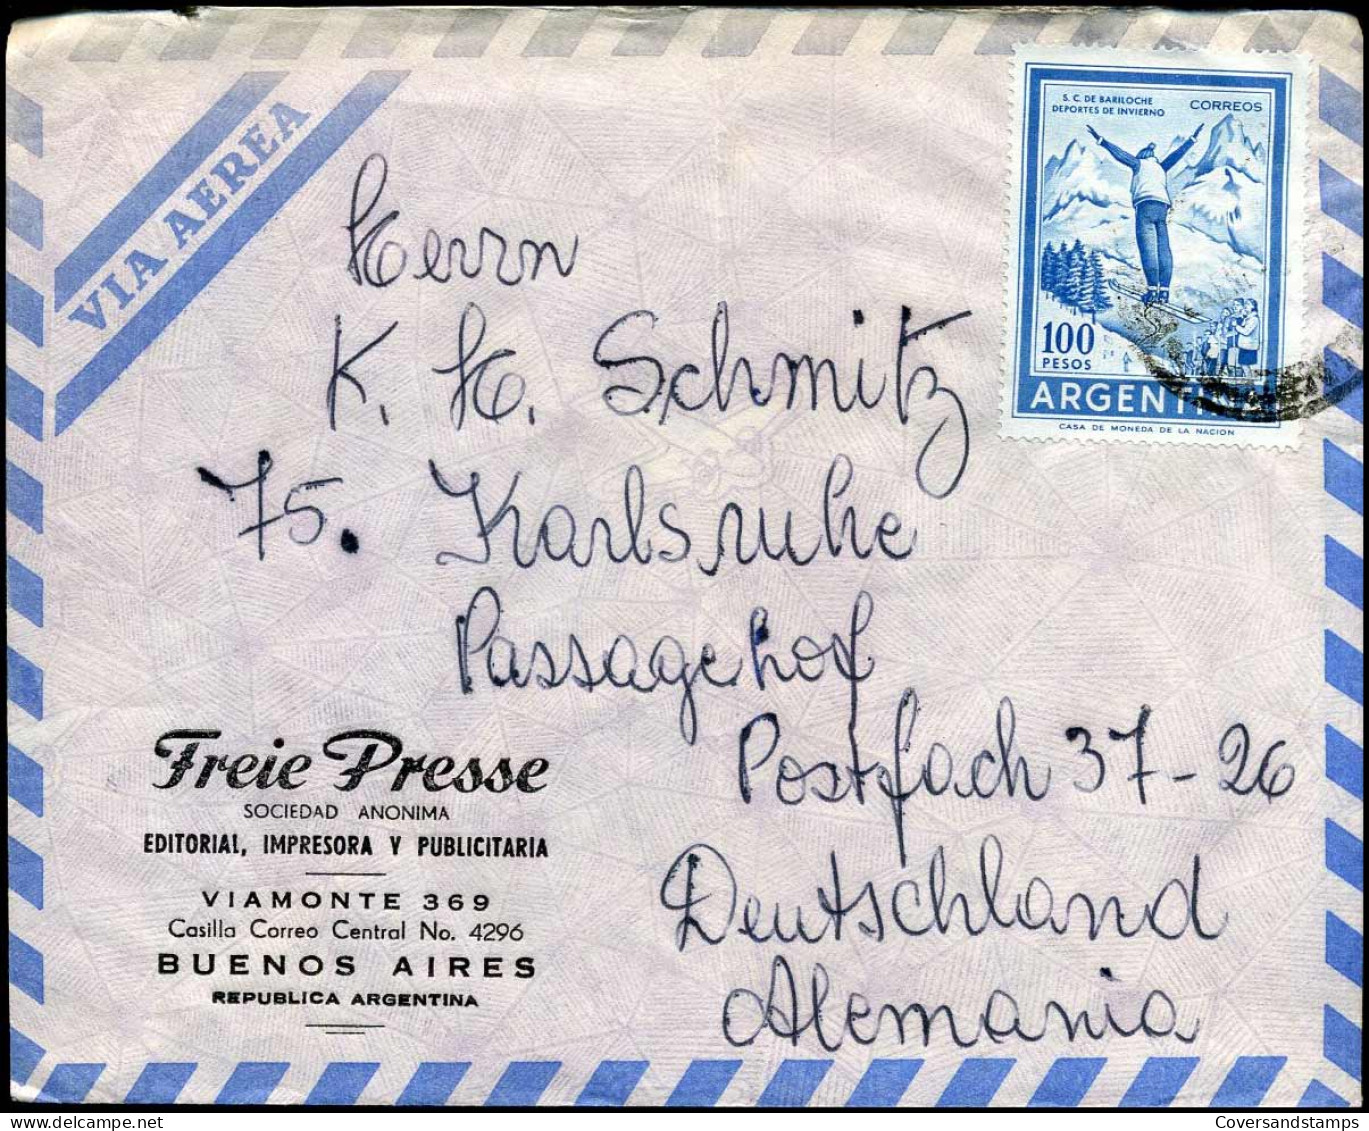 Airmail Cover To Karlsruhe, Germany - 'Freie Presse, Editiorial, Impresora Y Publicitaria, Buenos Aires' - Luchtpost